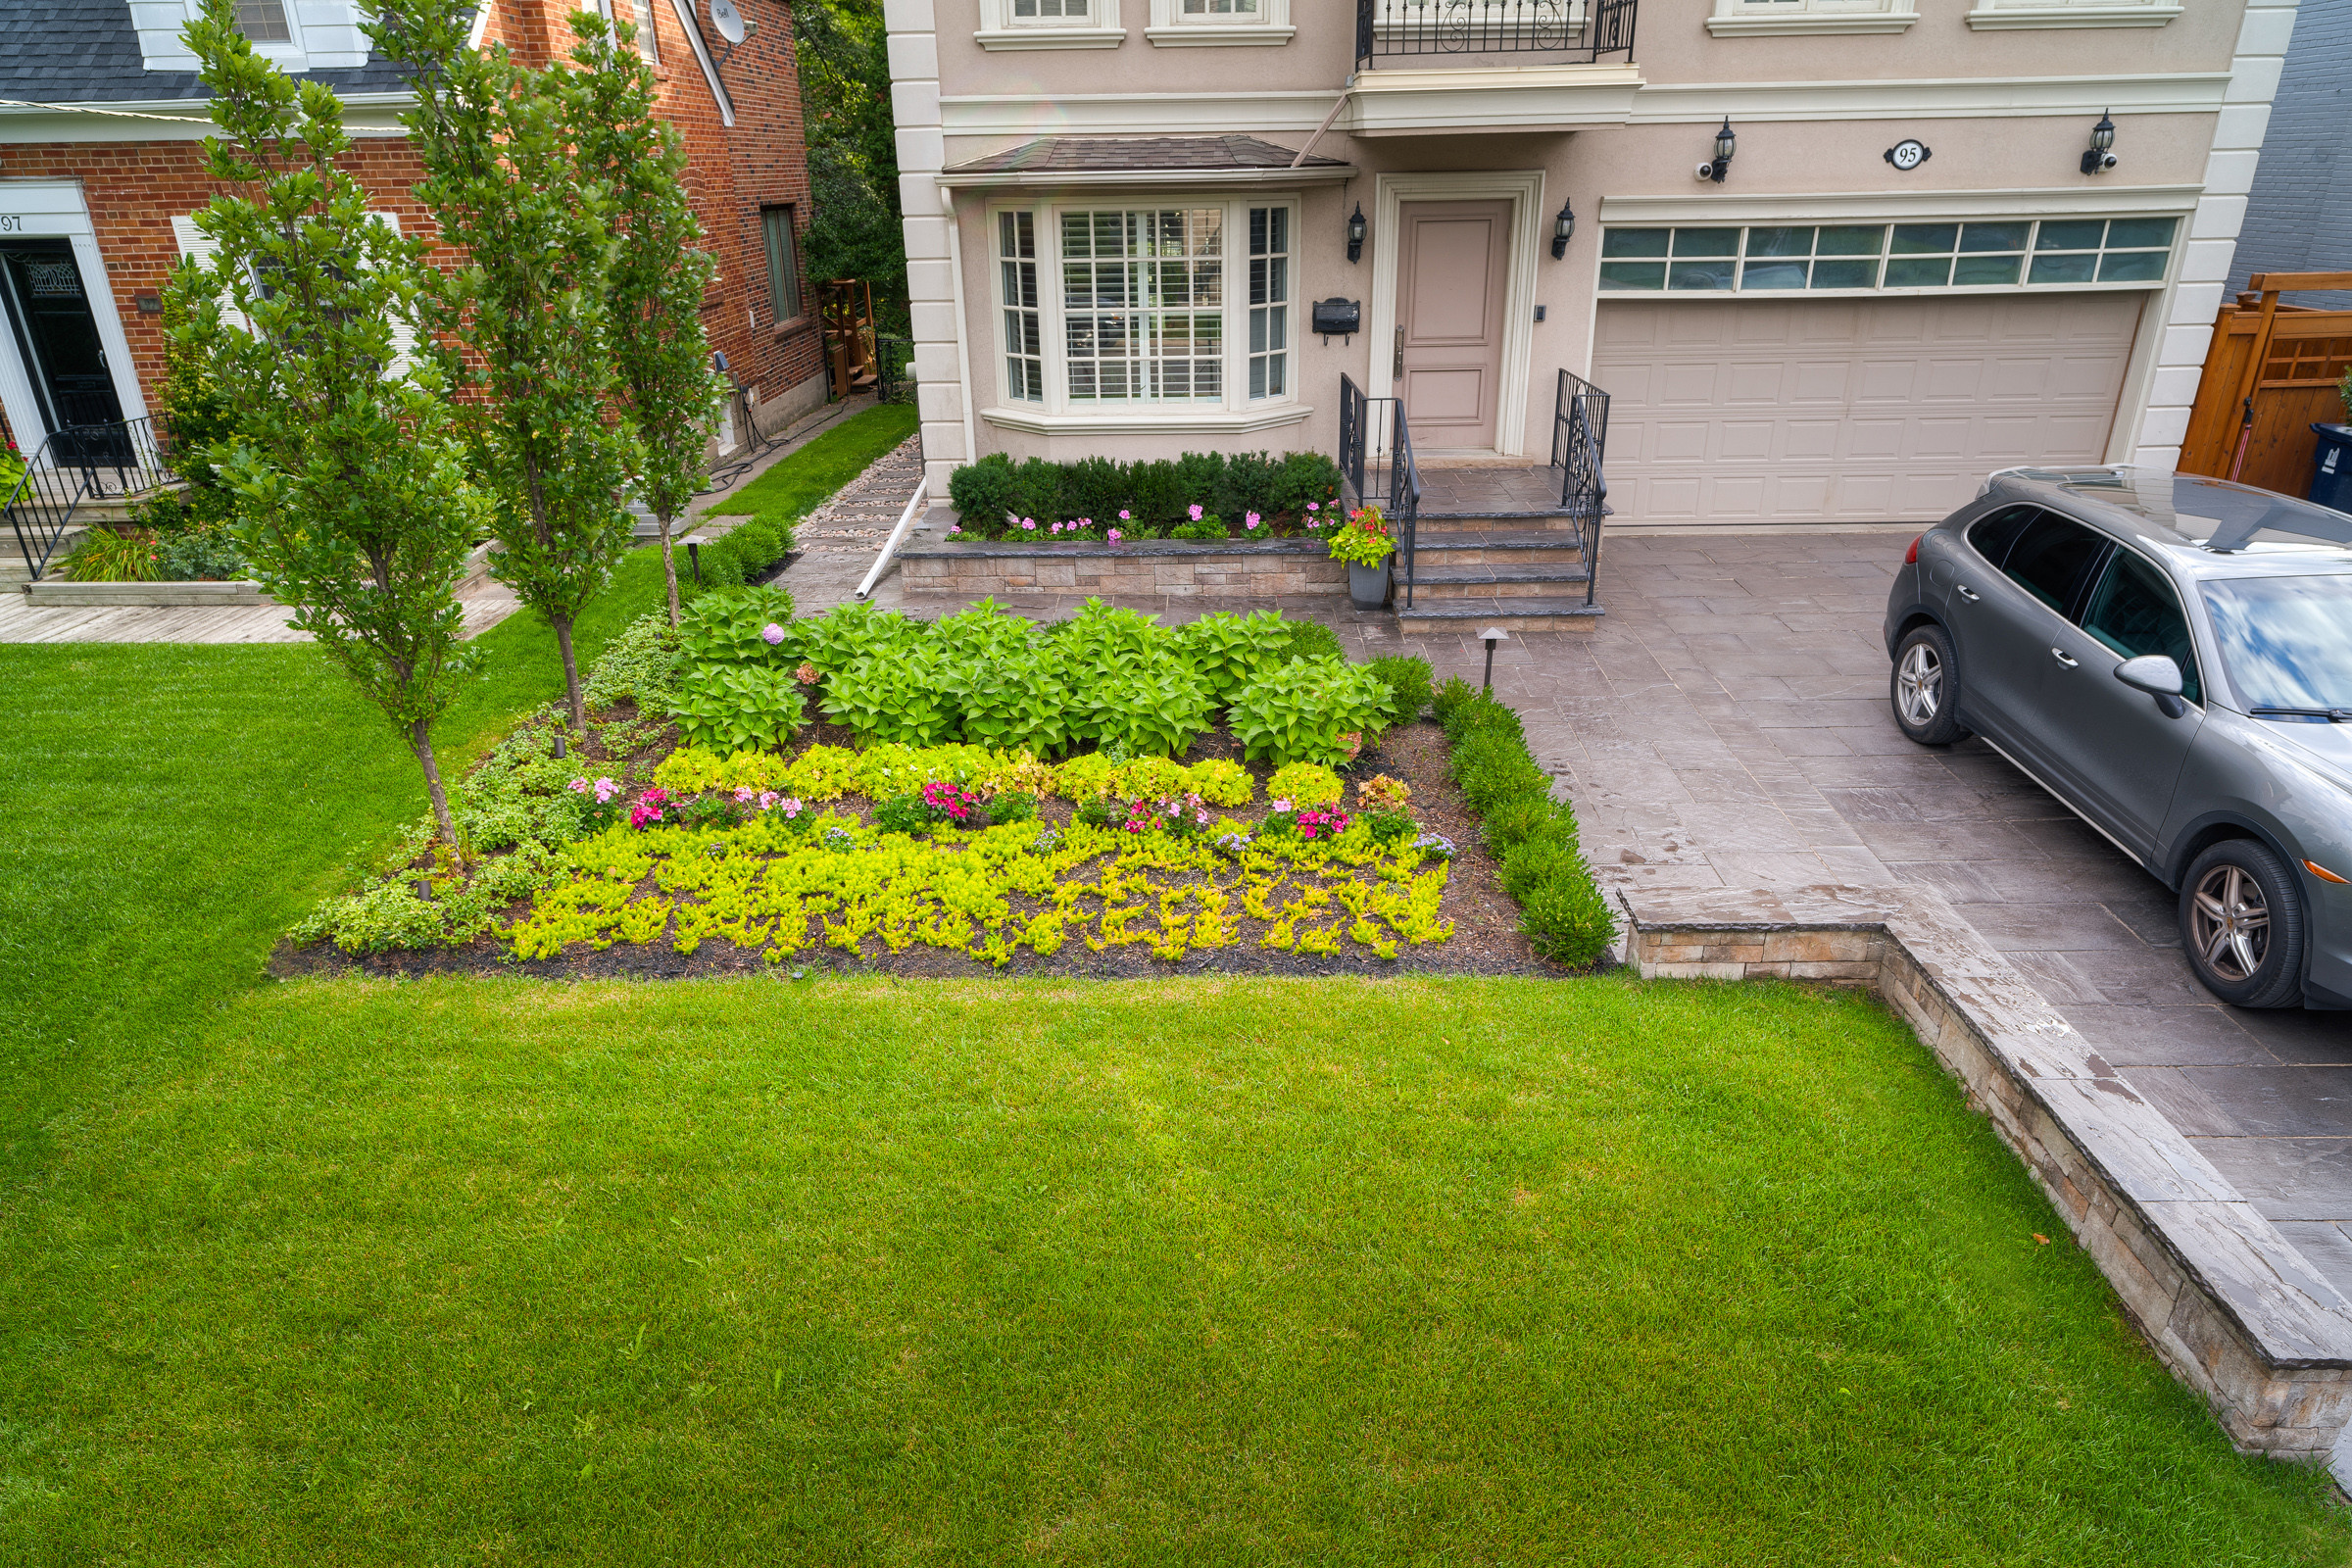 North York Front Yard Makeover